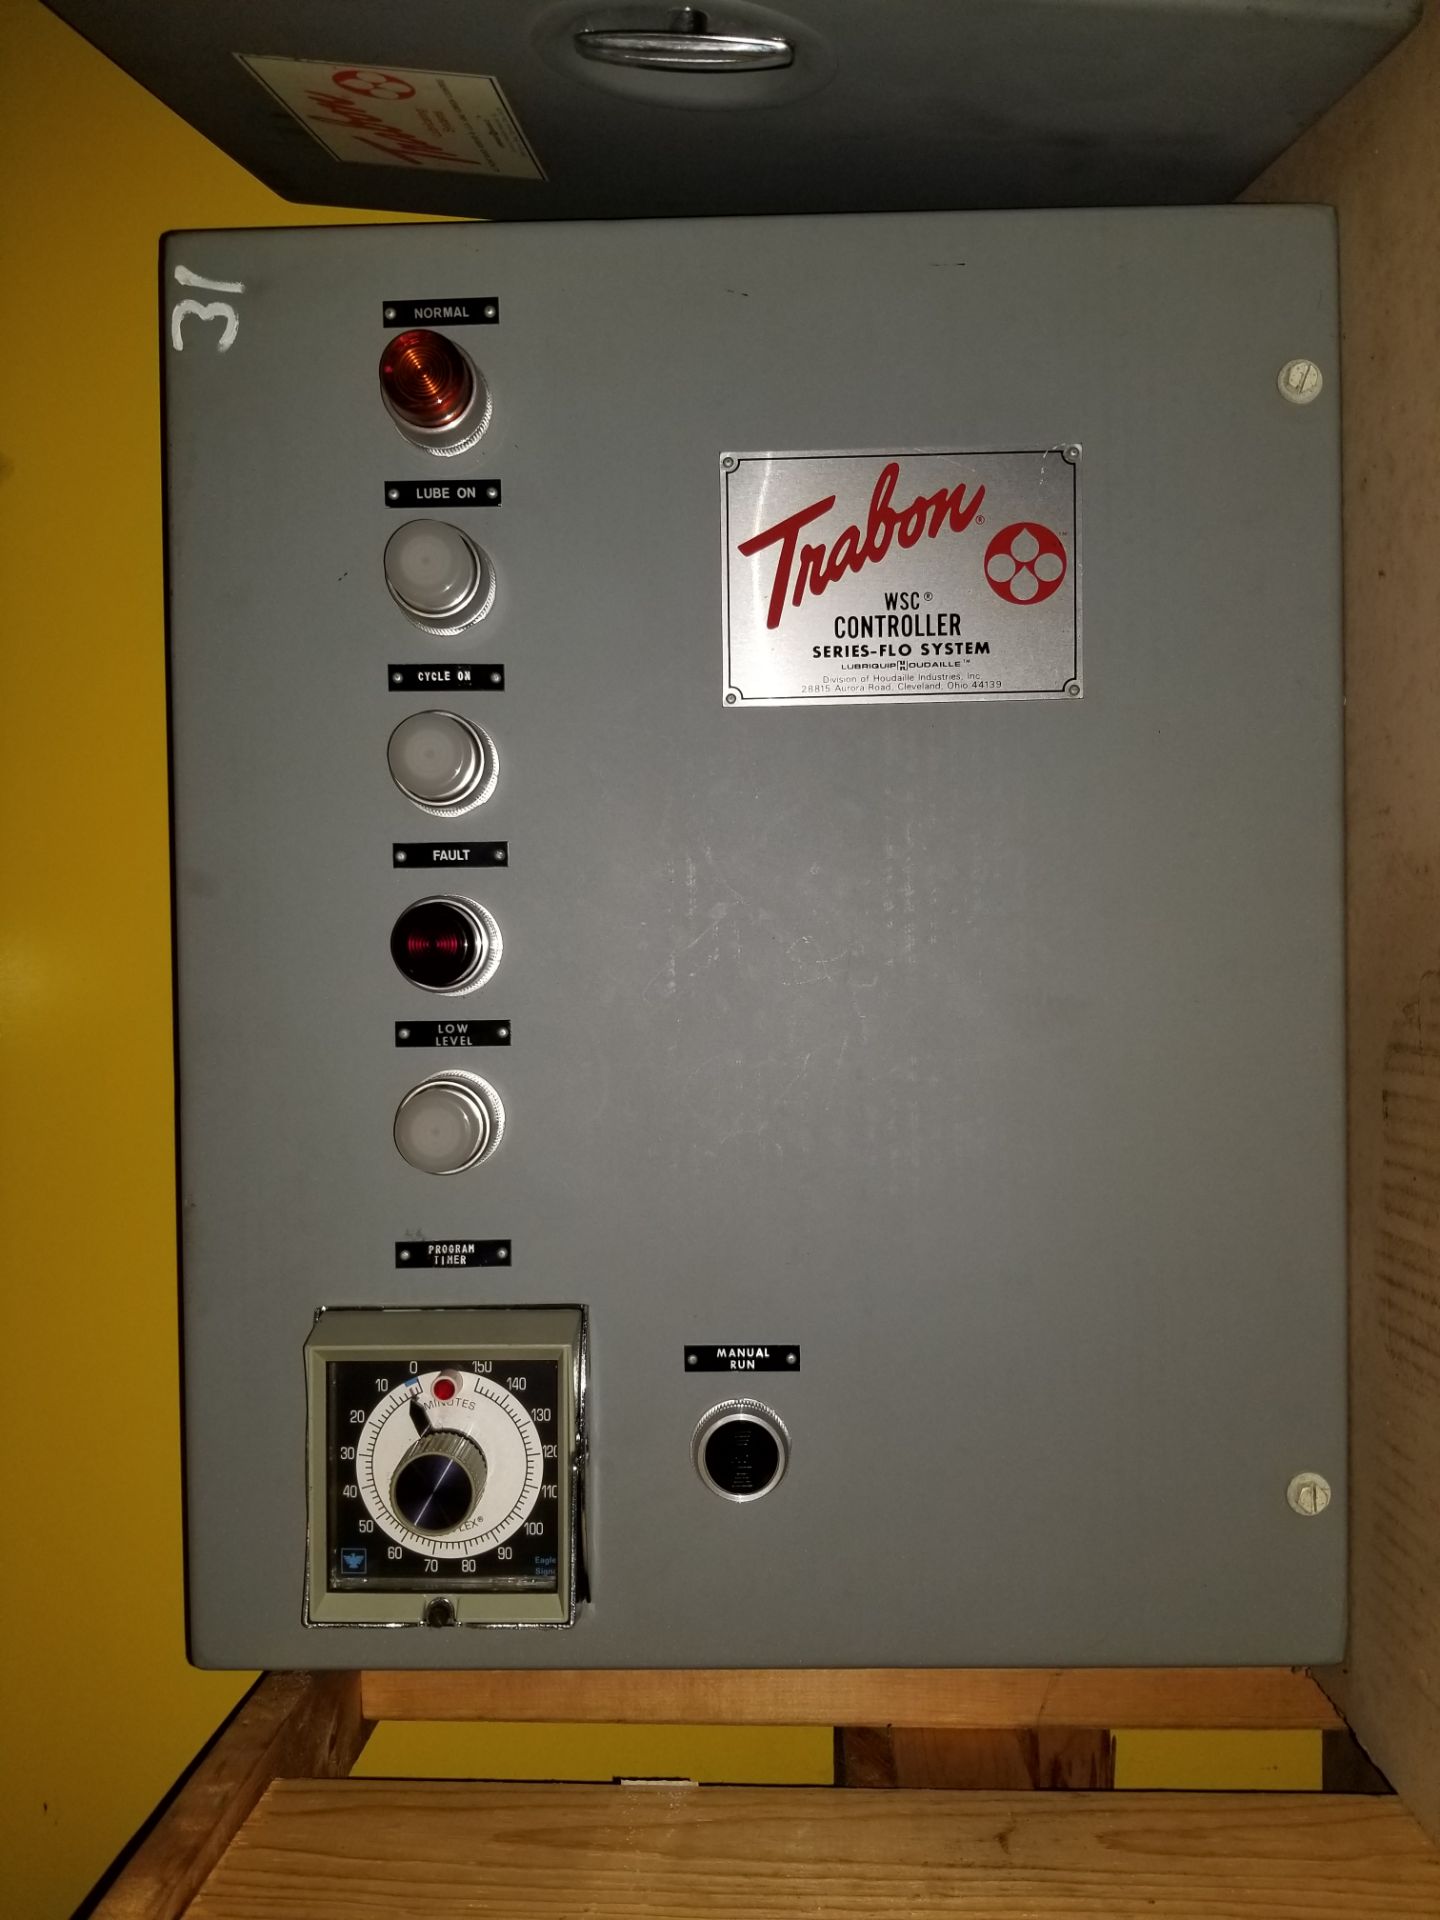 Trabon WSC Controllers Series Flo System, Trabon Lubricating Systems -